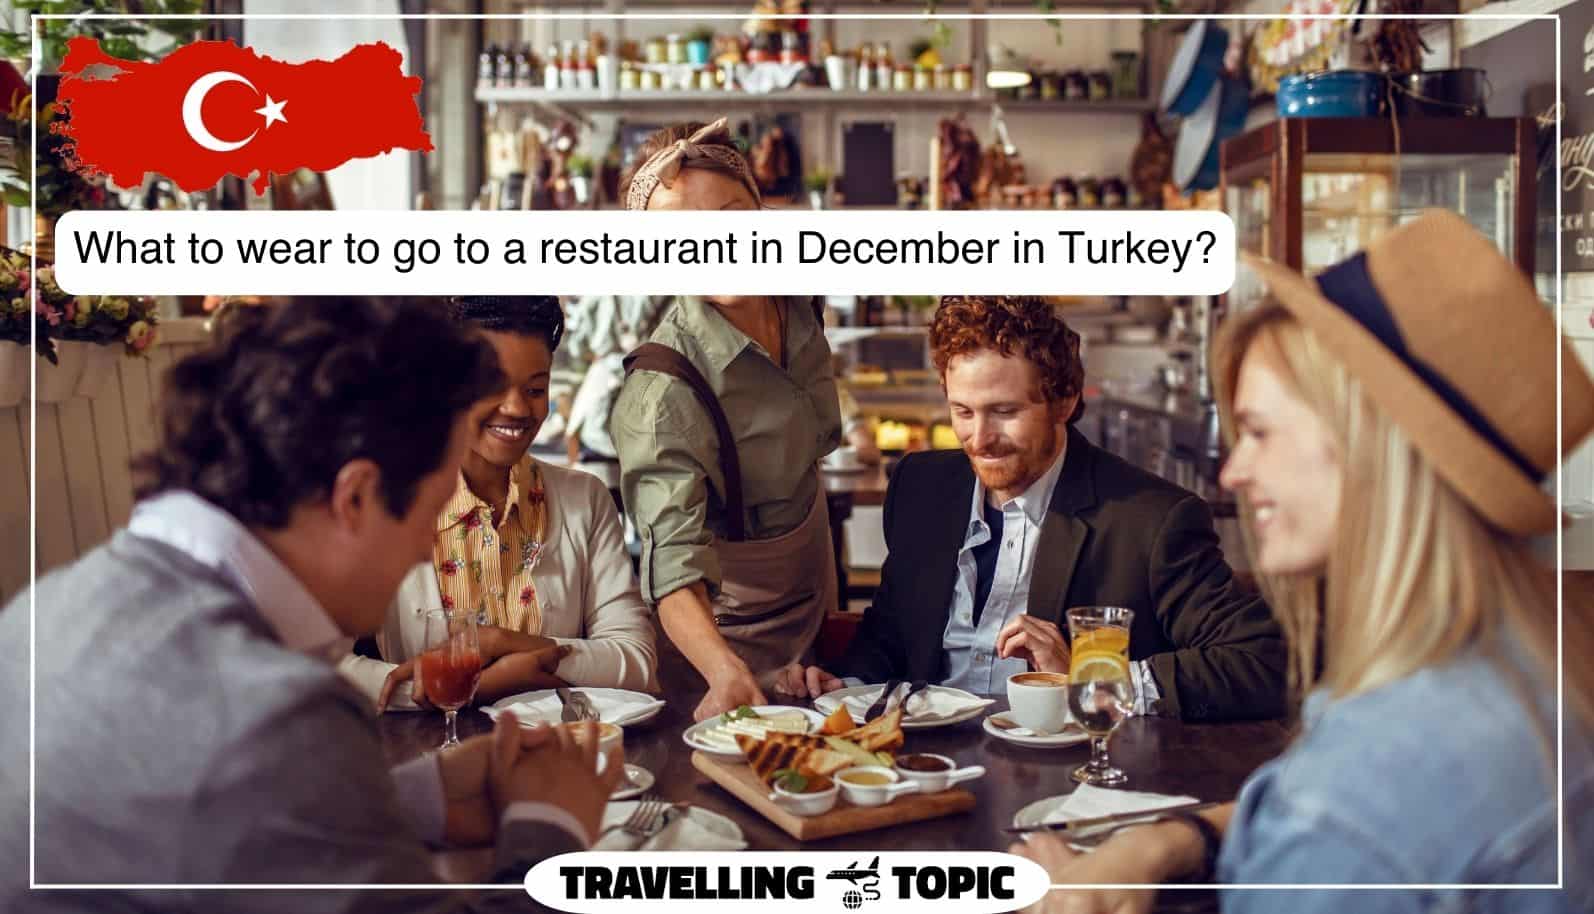 What to wear to go to a restaurant in December in Turkey